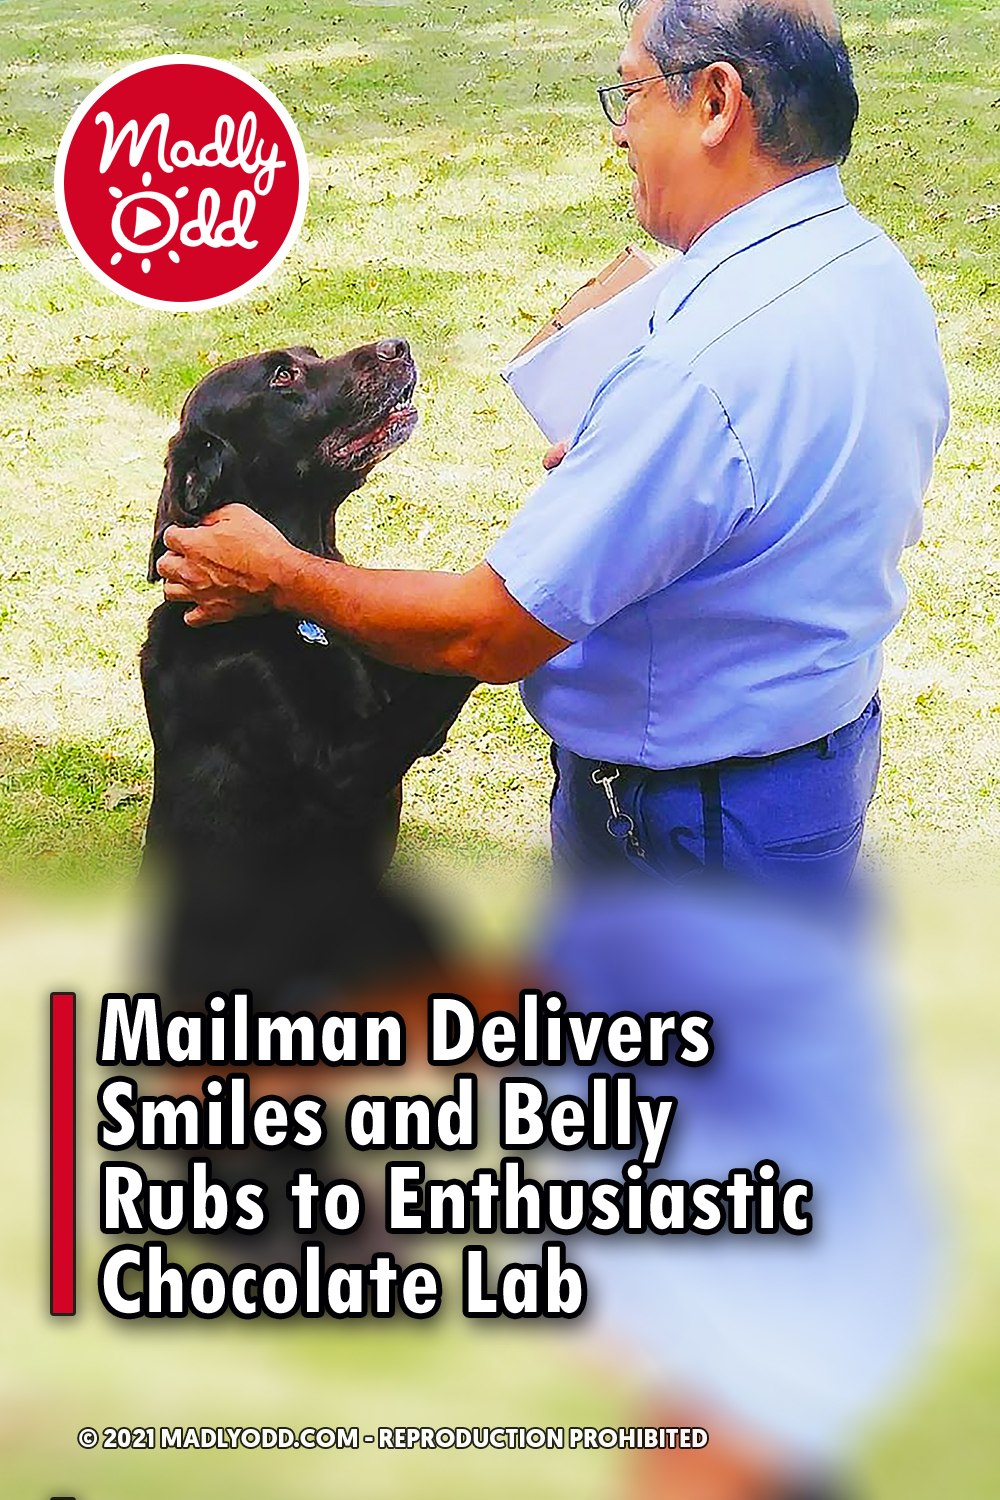 Mailman Delivers Smiles and Belly Rubs to Enthusiastic Chocolate Lab